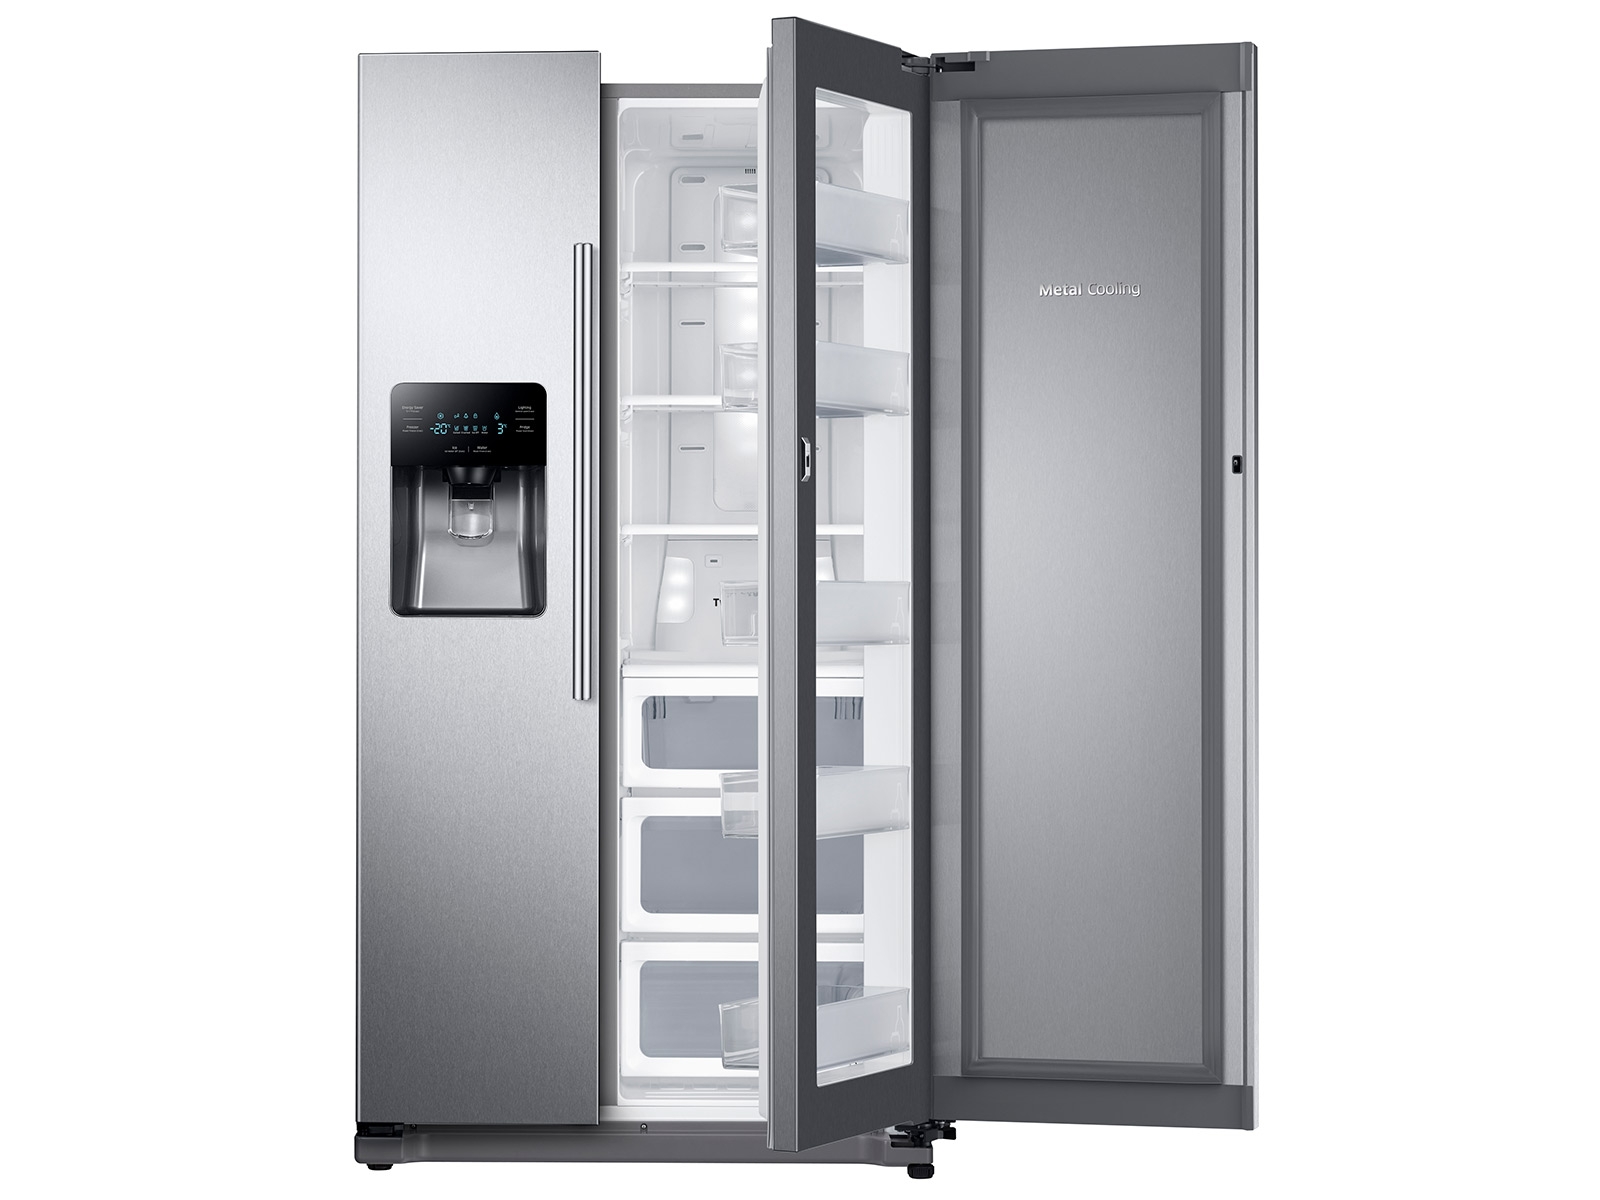 LG Refrigerator For sale - W.A Maintenance Electricals